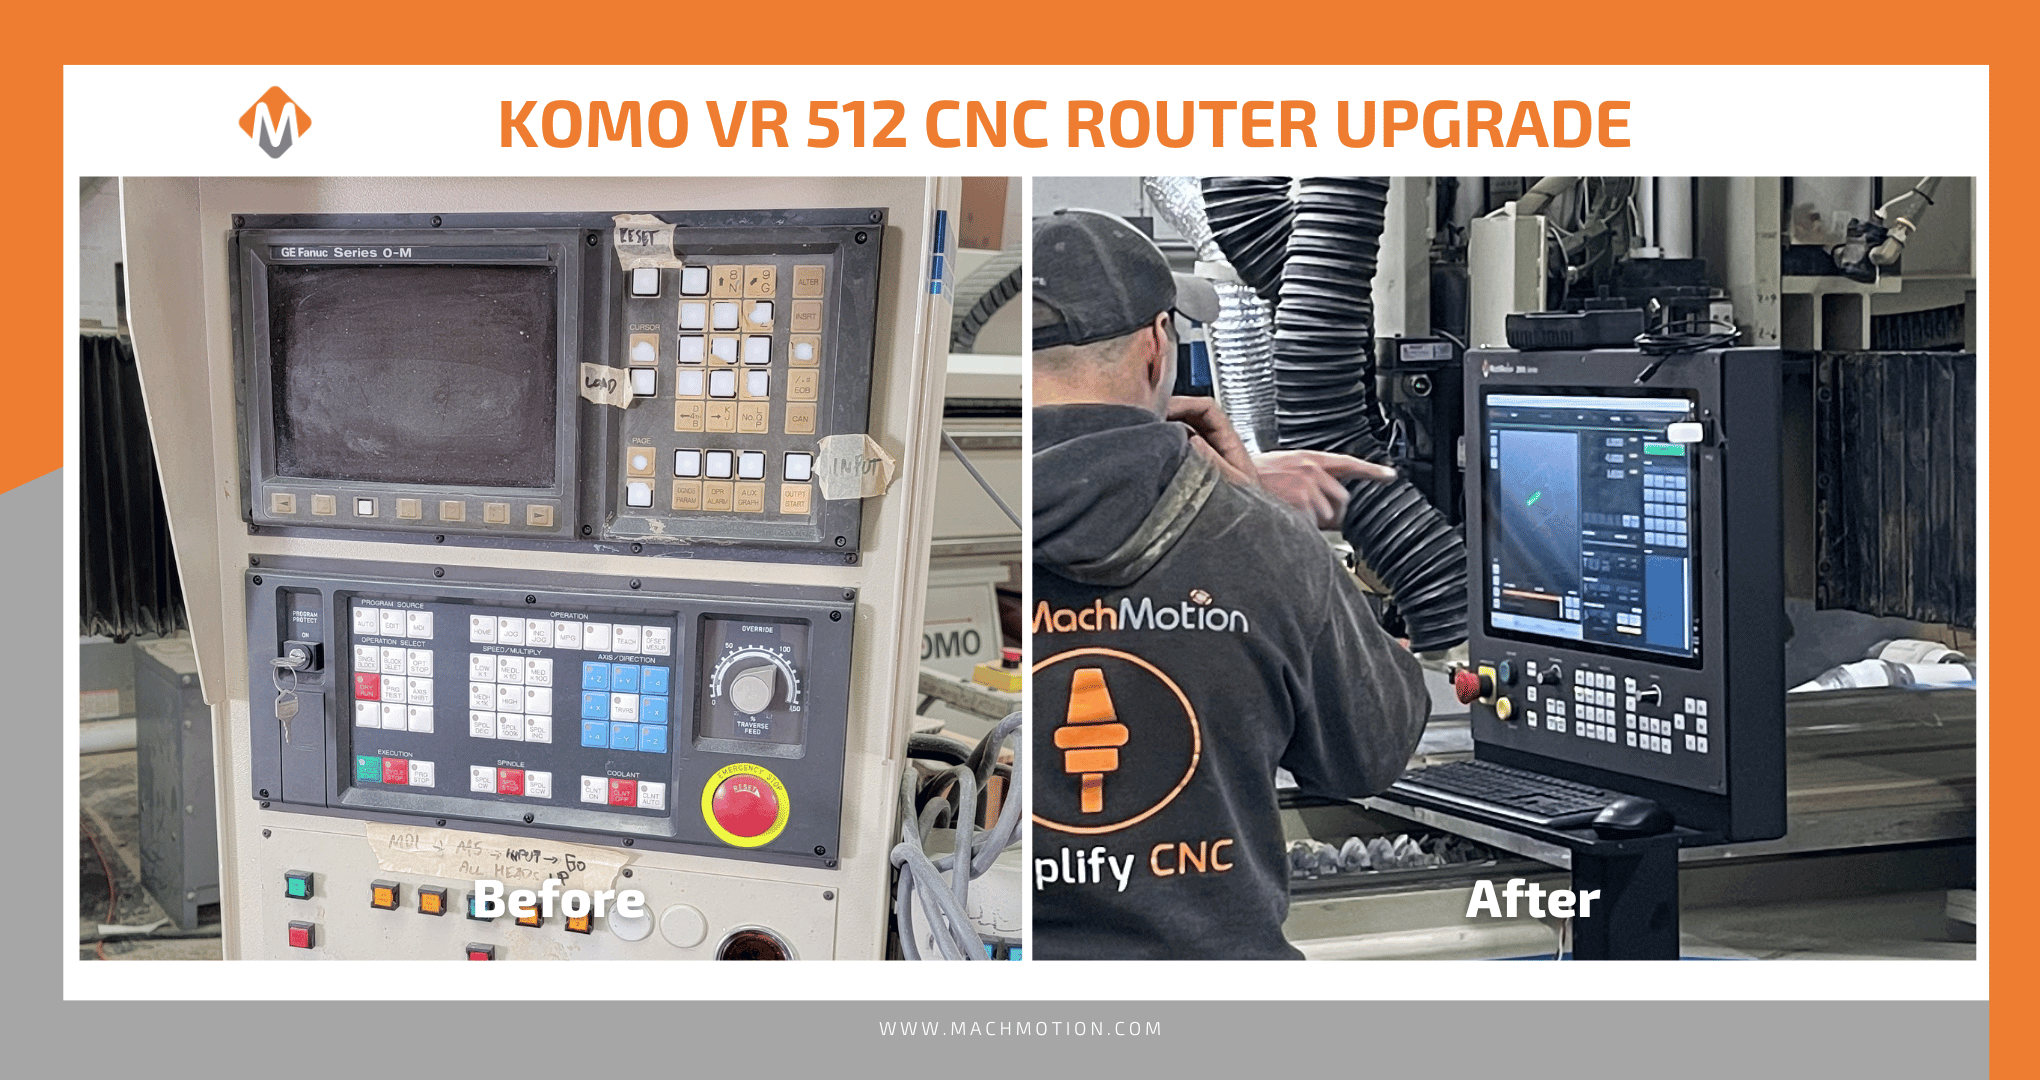 Before and After KOMO 512 VR CNC Router Retrofit